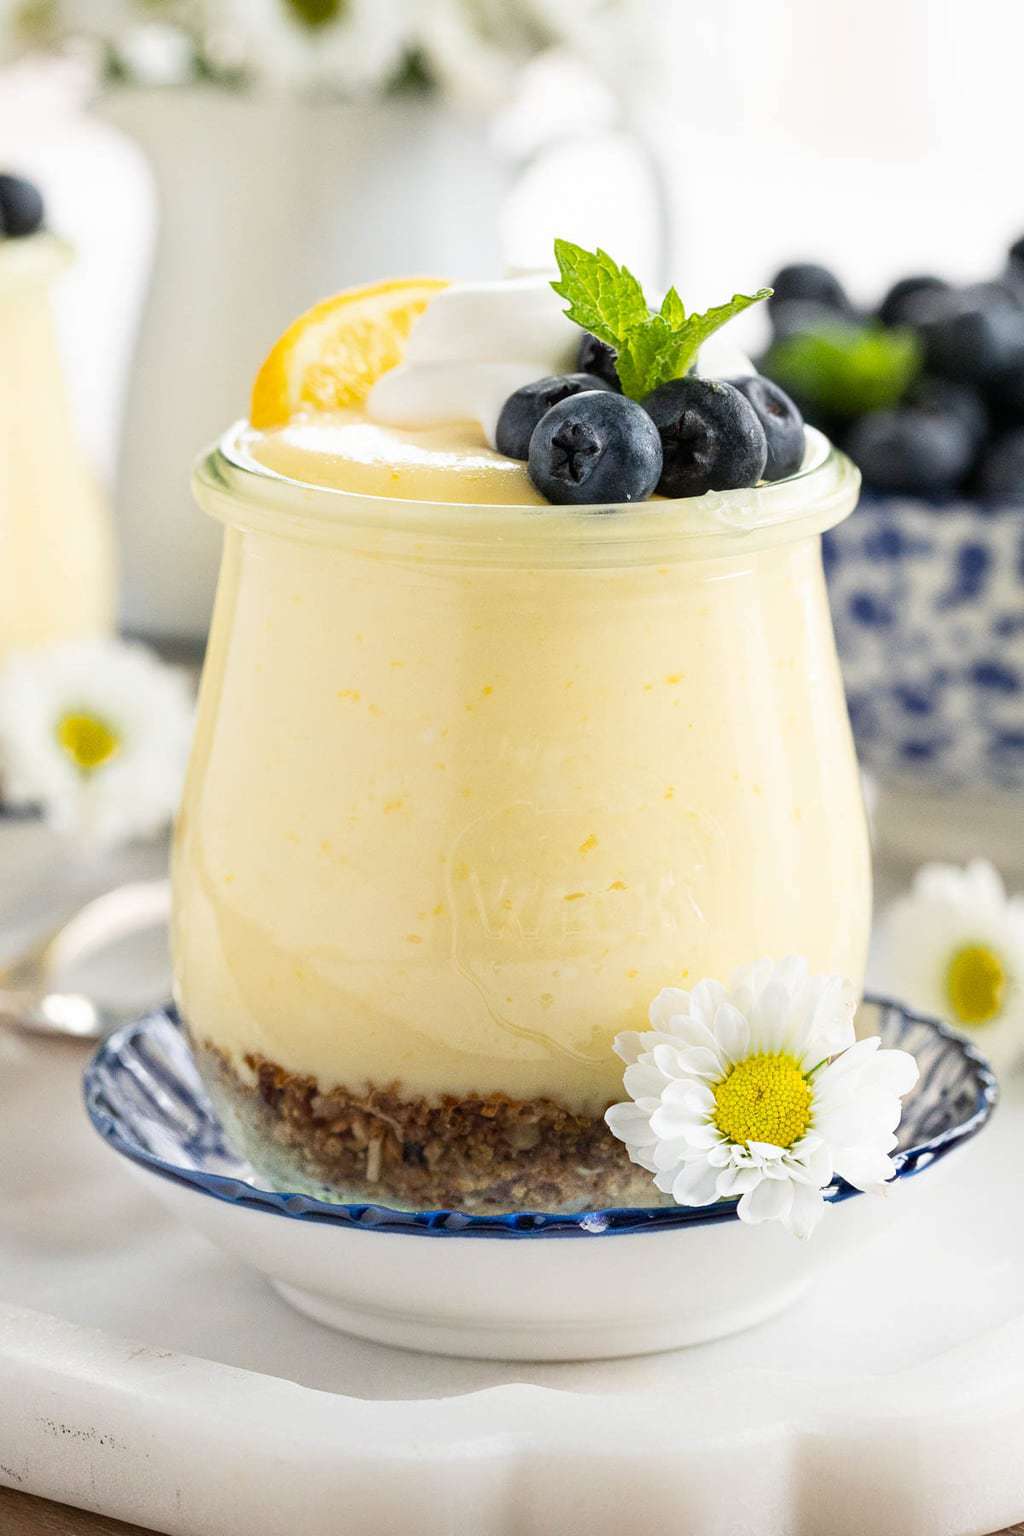 Vertical closeup photo of Easy Lemon Curd Mouse in a small glass Weck jar garnished with blueberries, mint leaves and flowers.